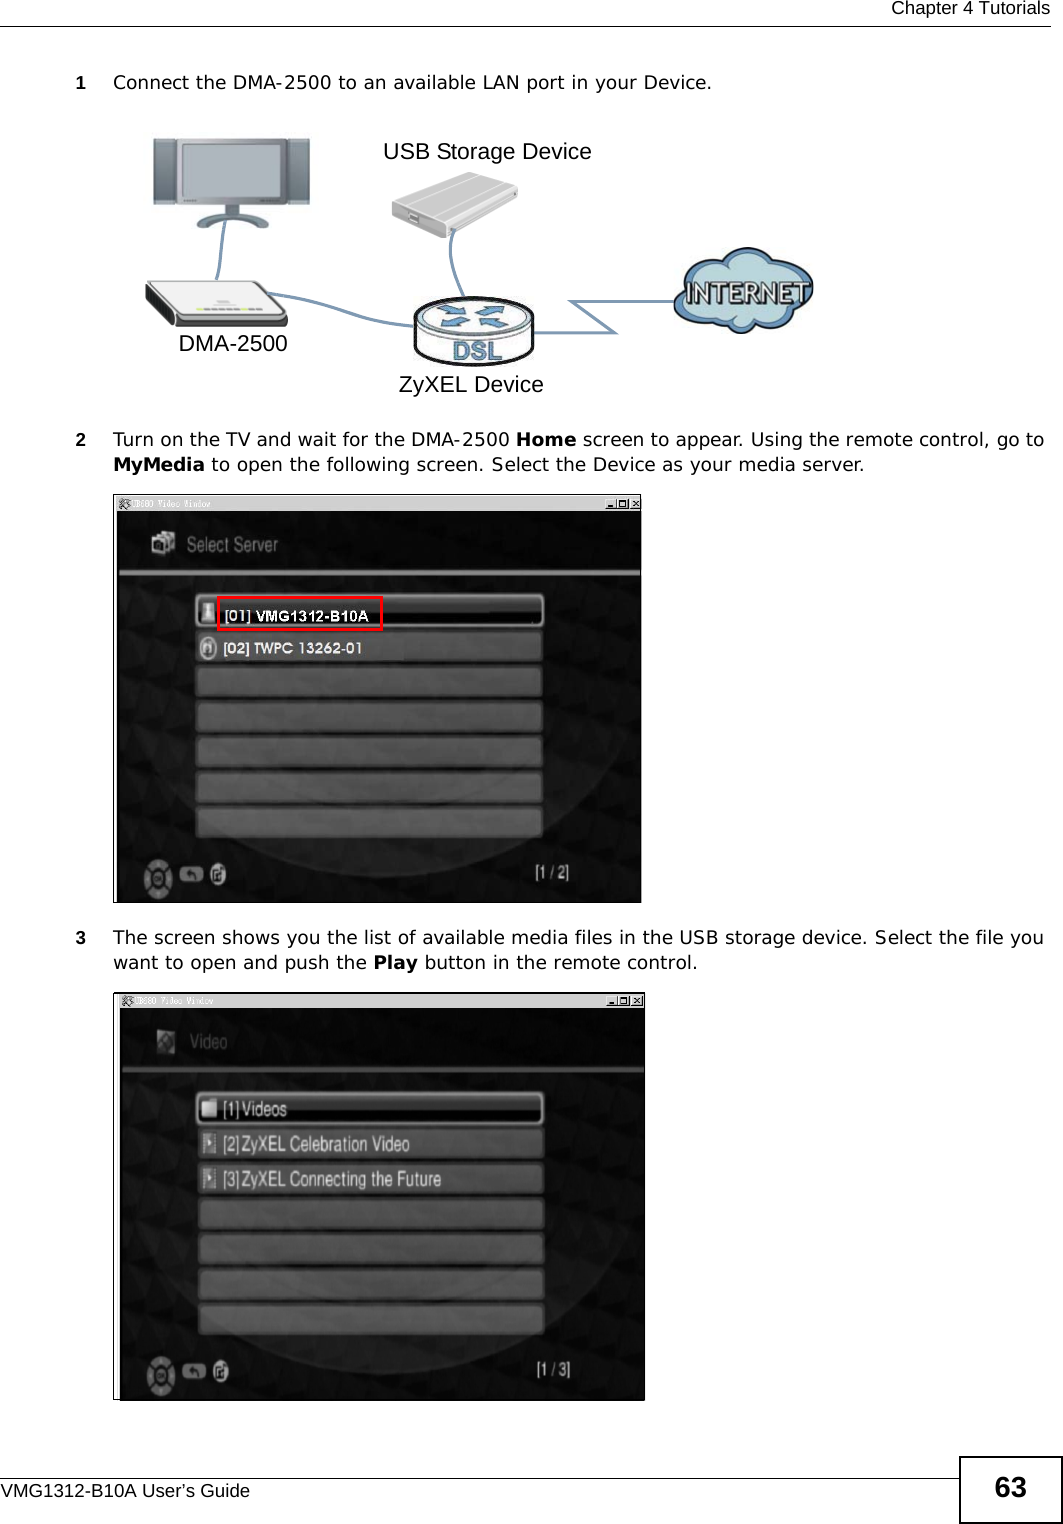  Chapter 4 TutorialsVMG1312-B10A User’s Guide 631Connect the DMA-2500 to an available LAN port in your Device.Tutorial: Media Server Setup (Using DMA)2Turn on the TV and wait for the DMA-2500 Home screen to appear. Using the remote control, go to MyMedia to open the following screen. Select the Device as your media server.Tutorial: Media Sharing using DMA-25003The screen shows you the list of available media files in the USB storage device. Select the file you want to open and push the Play button in the remote control.Tutorial: Media Sharing using DMA-2500 (2)DMA-2500ZyXEL DeviceUSB Storage Device